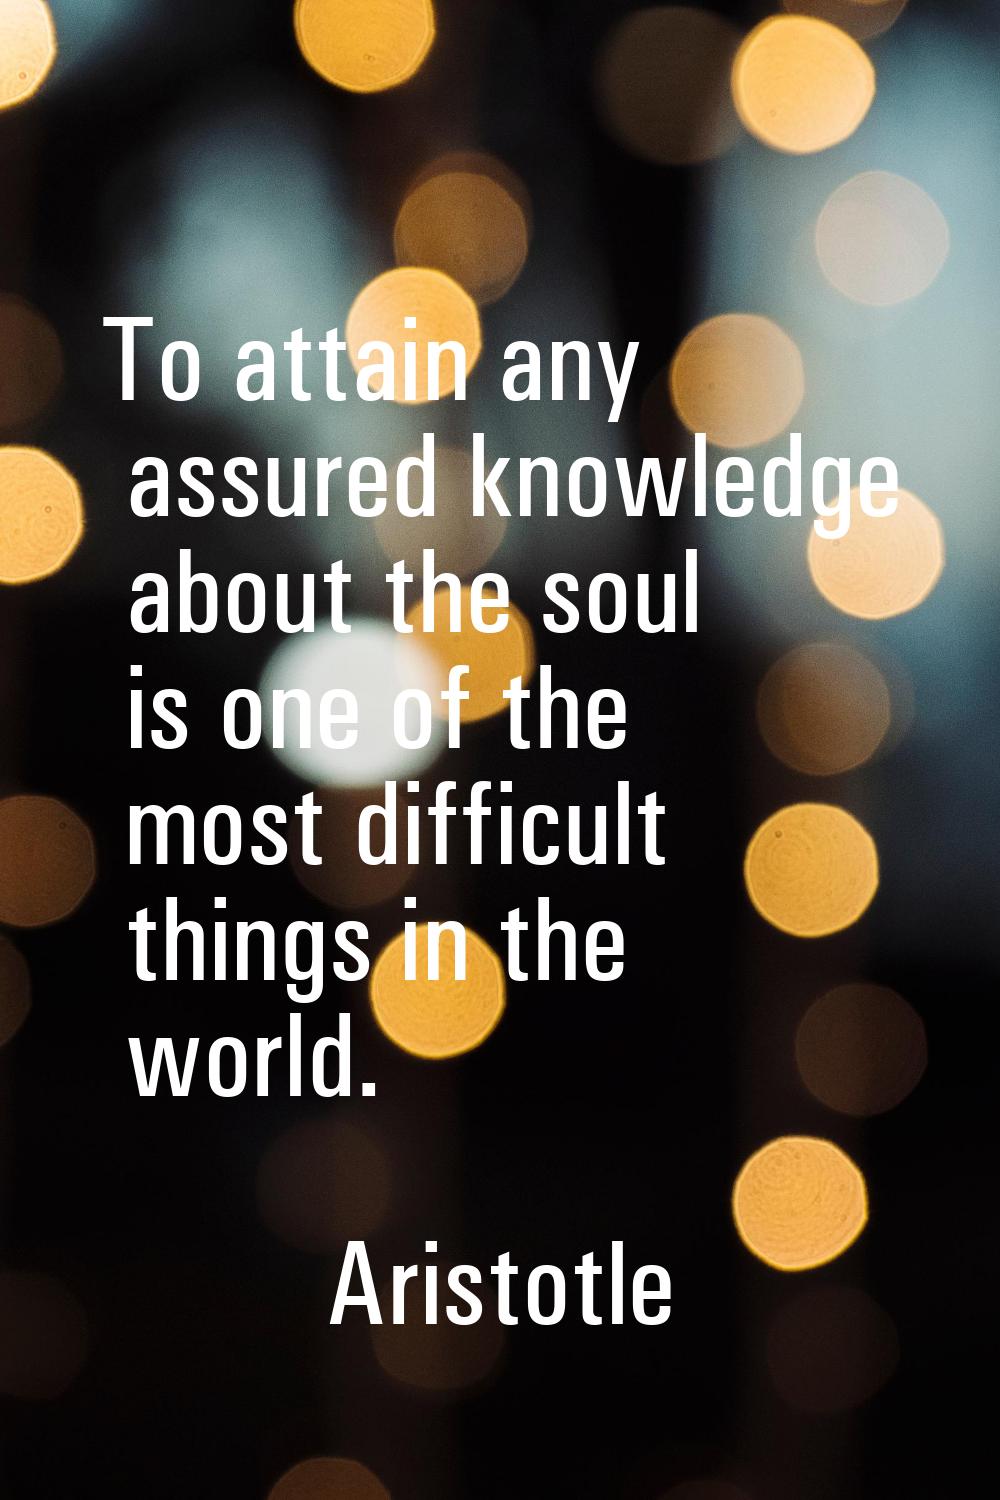 To attain any assured knowledge about the soul is one of the most difficult things in the world.